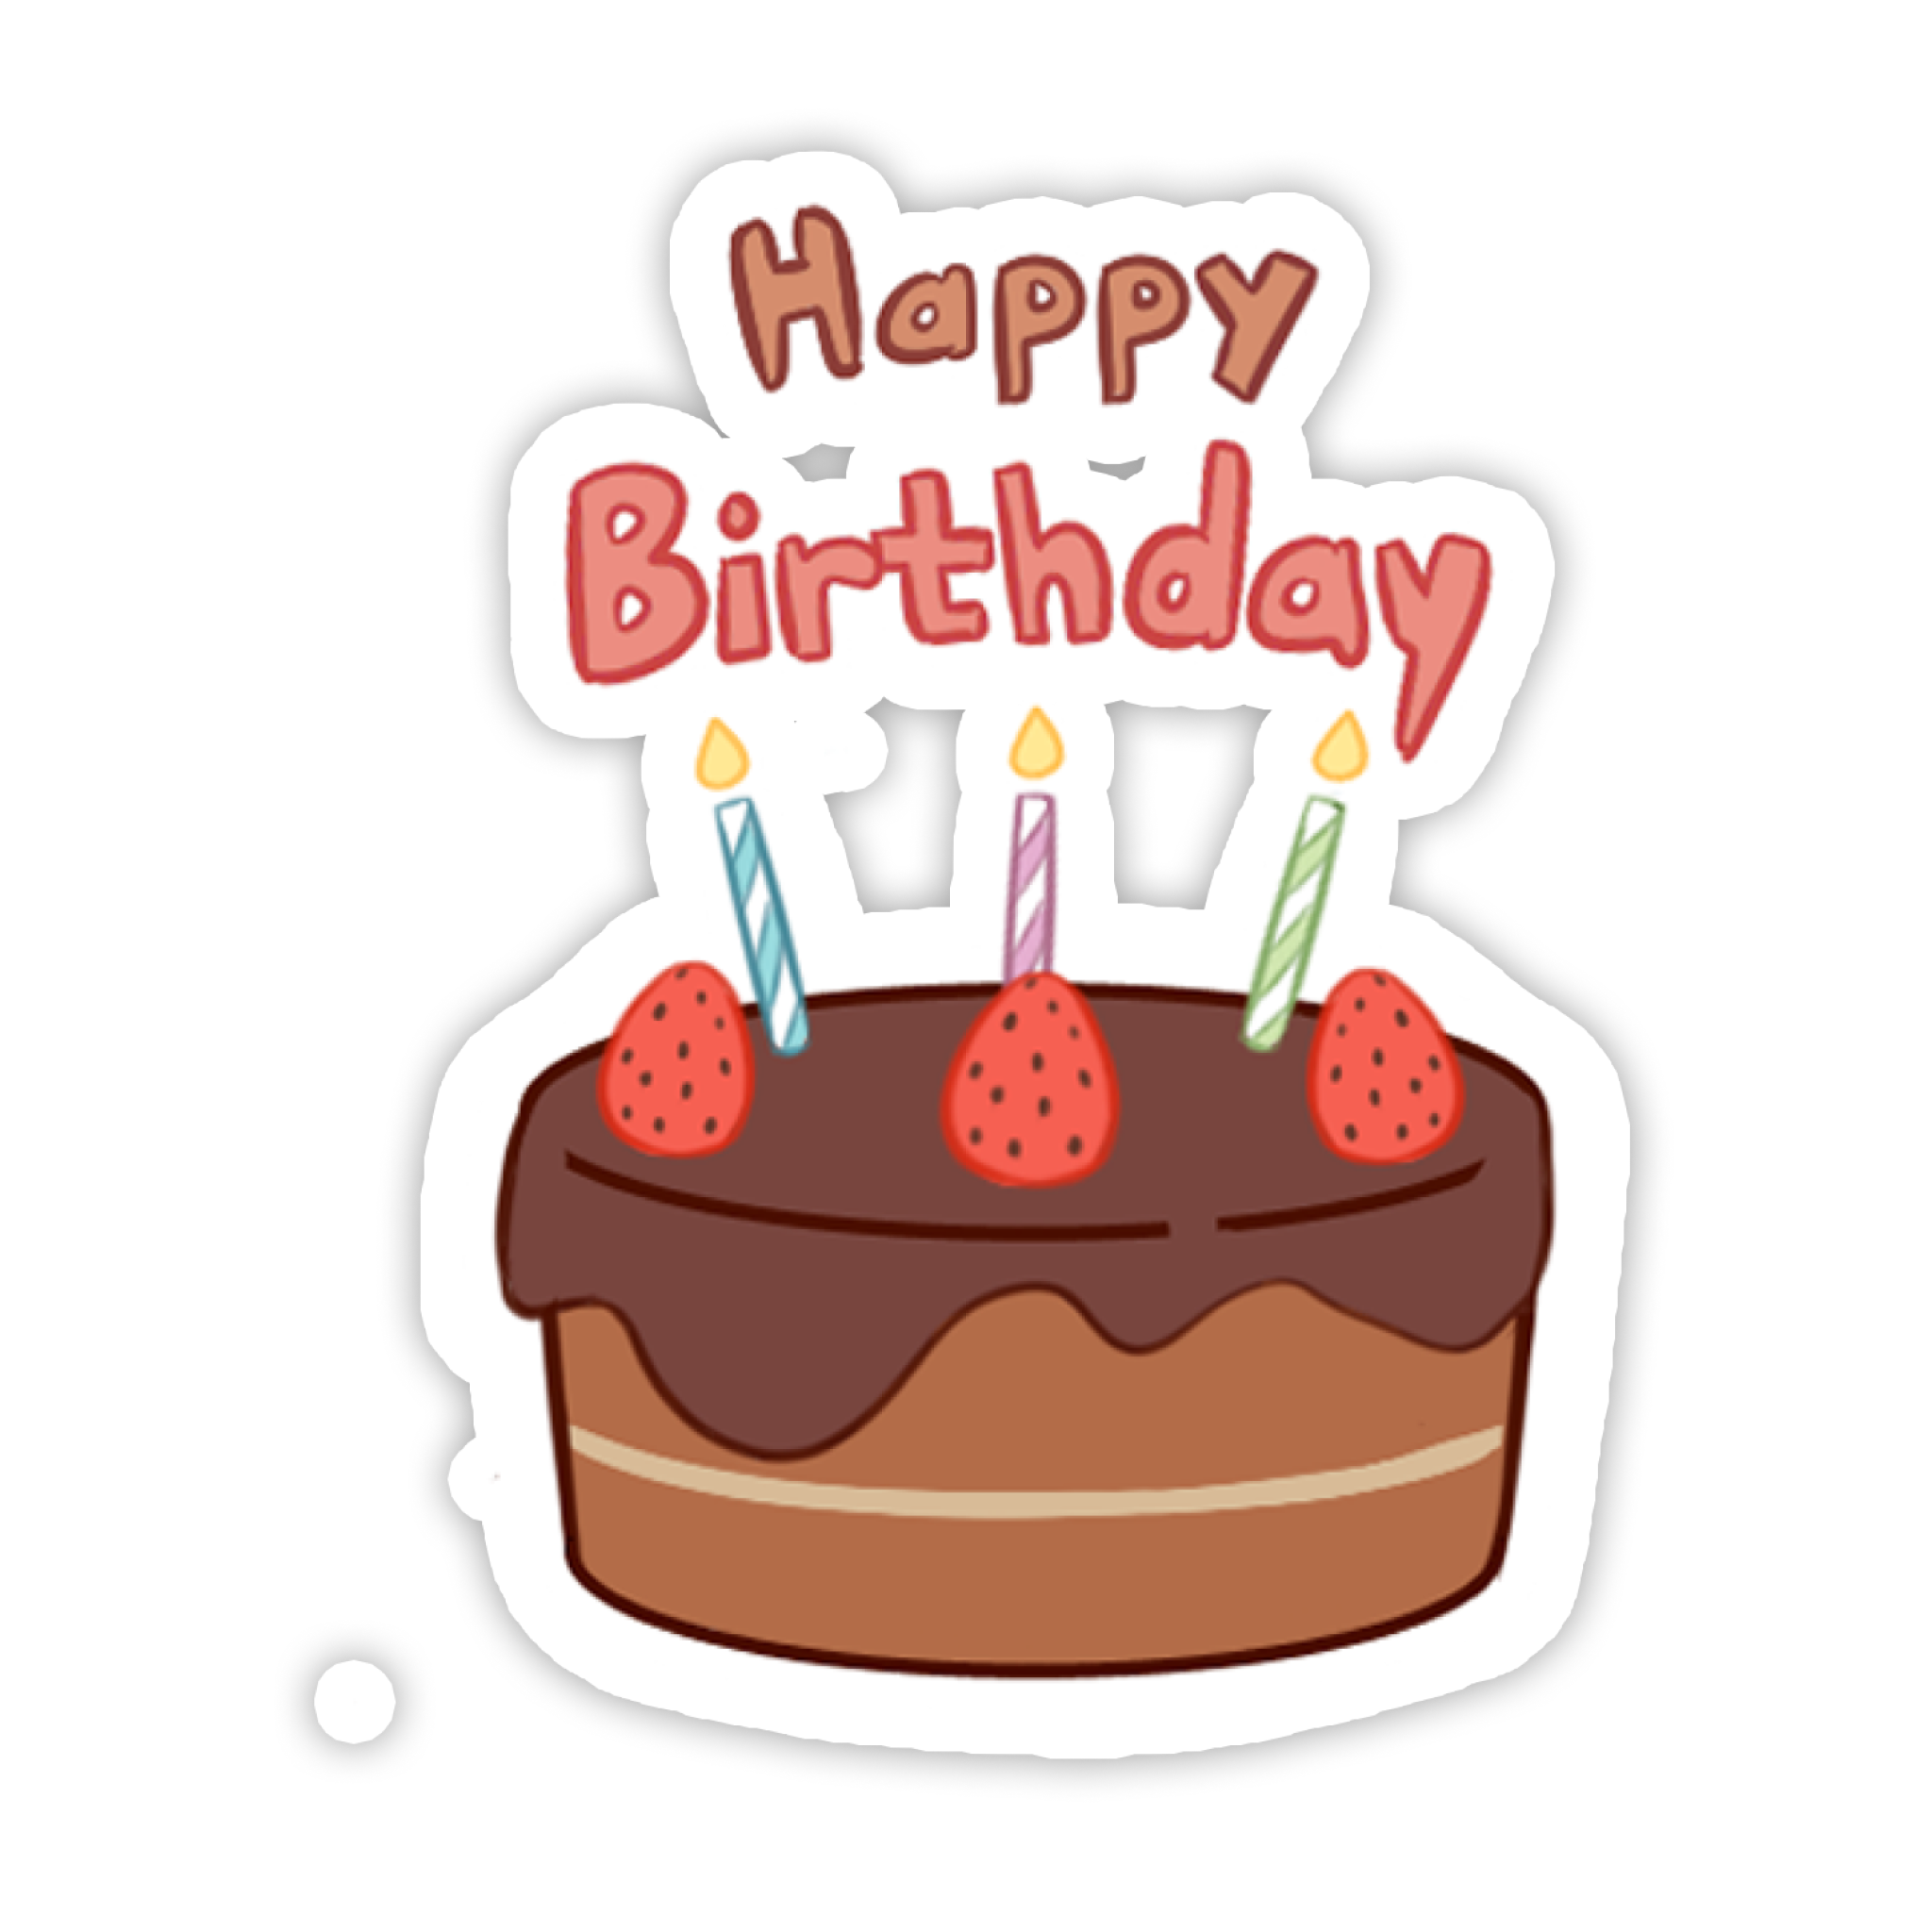 Find This Pin And More On Clipart By Nastyareferee - Birthday Cake Sticker  - Free Transparent PNG Clipart Images Download